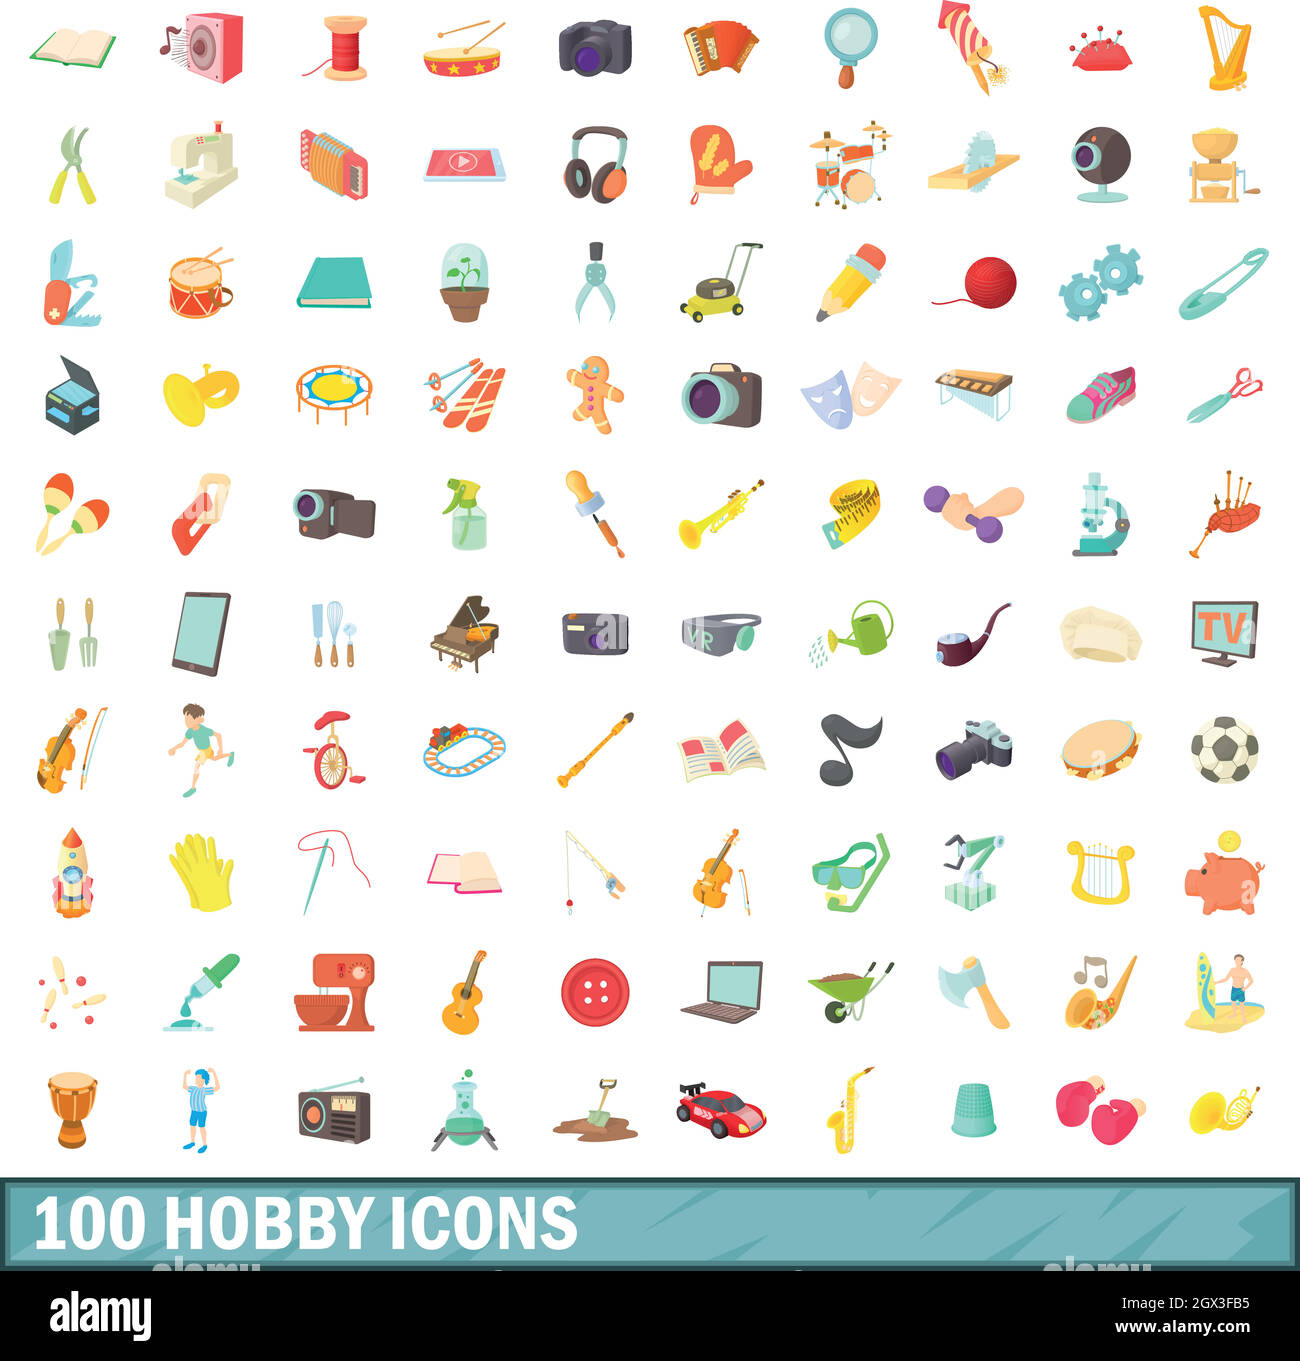 59,200+ Adult Hobby Stock Illustrations, Royalty-Free Vector